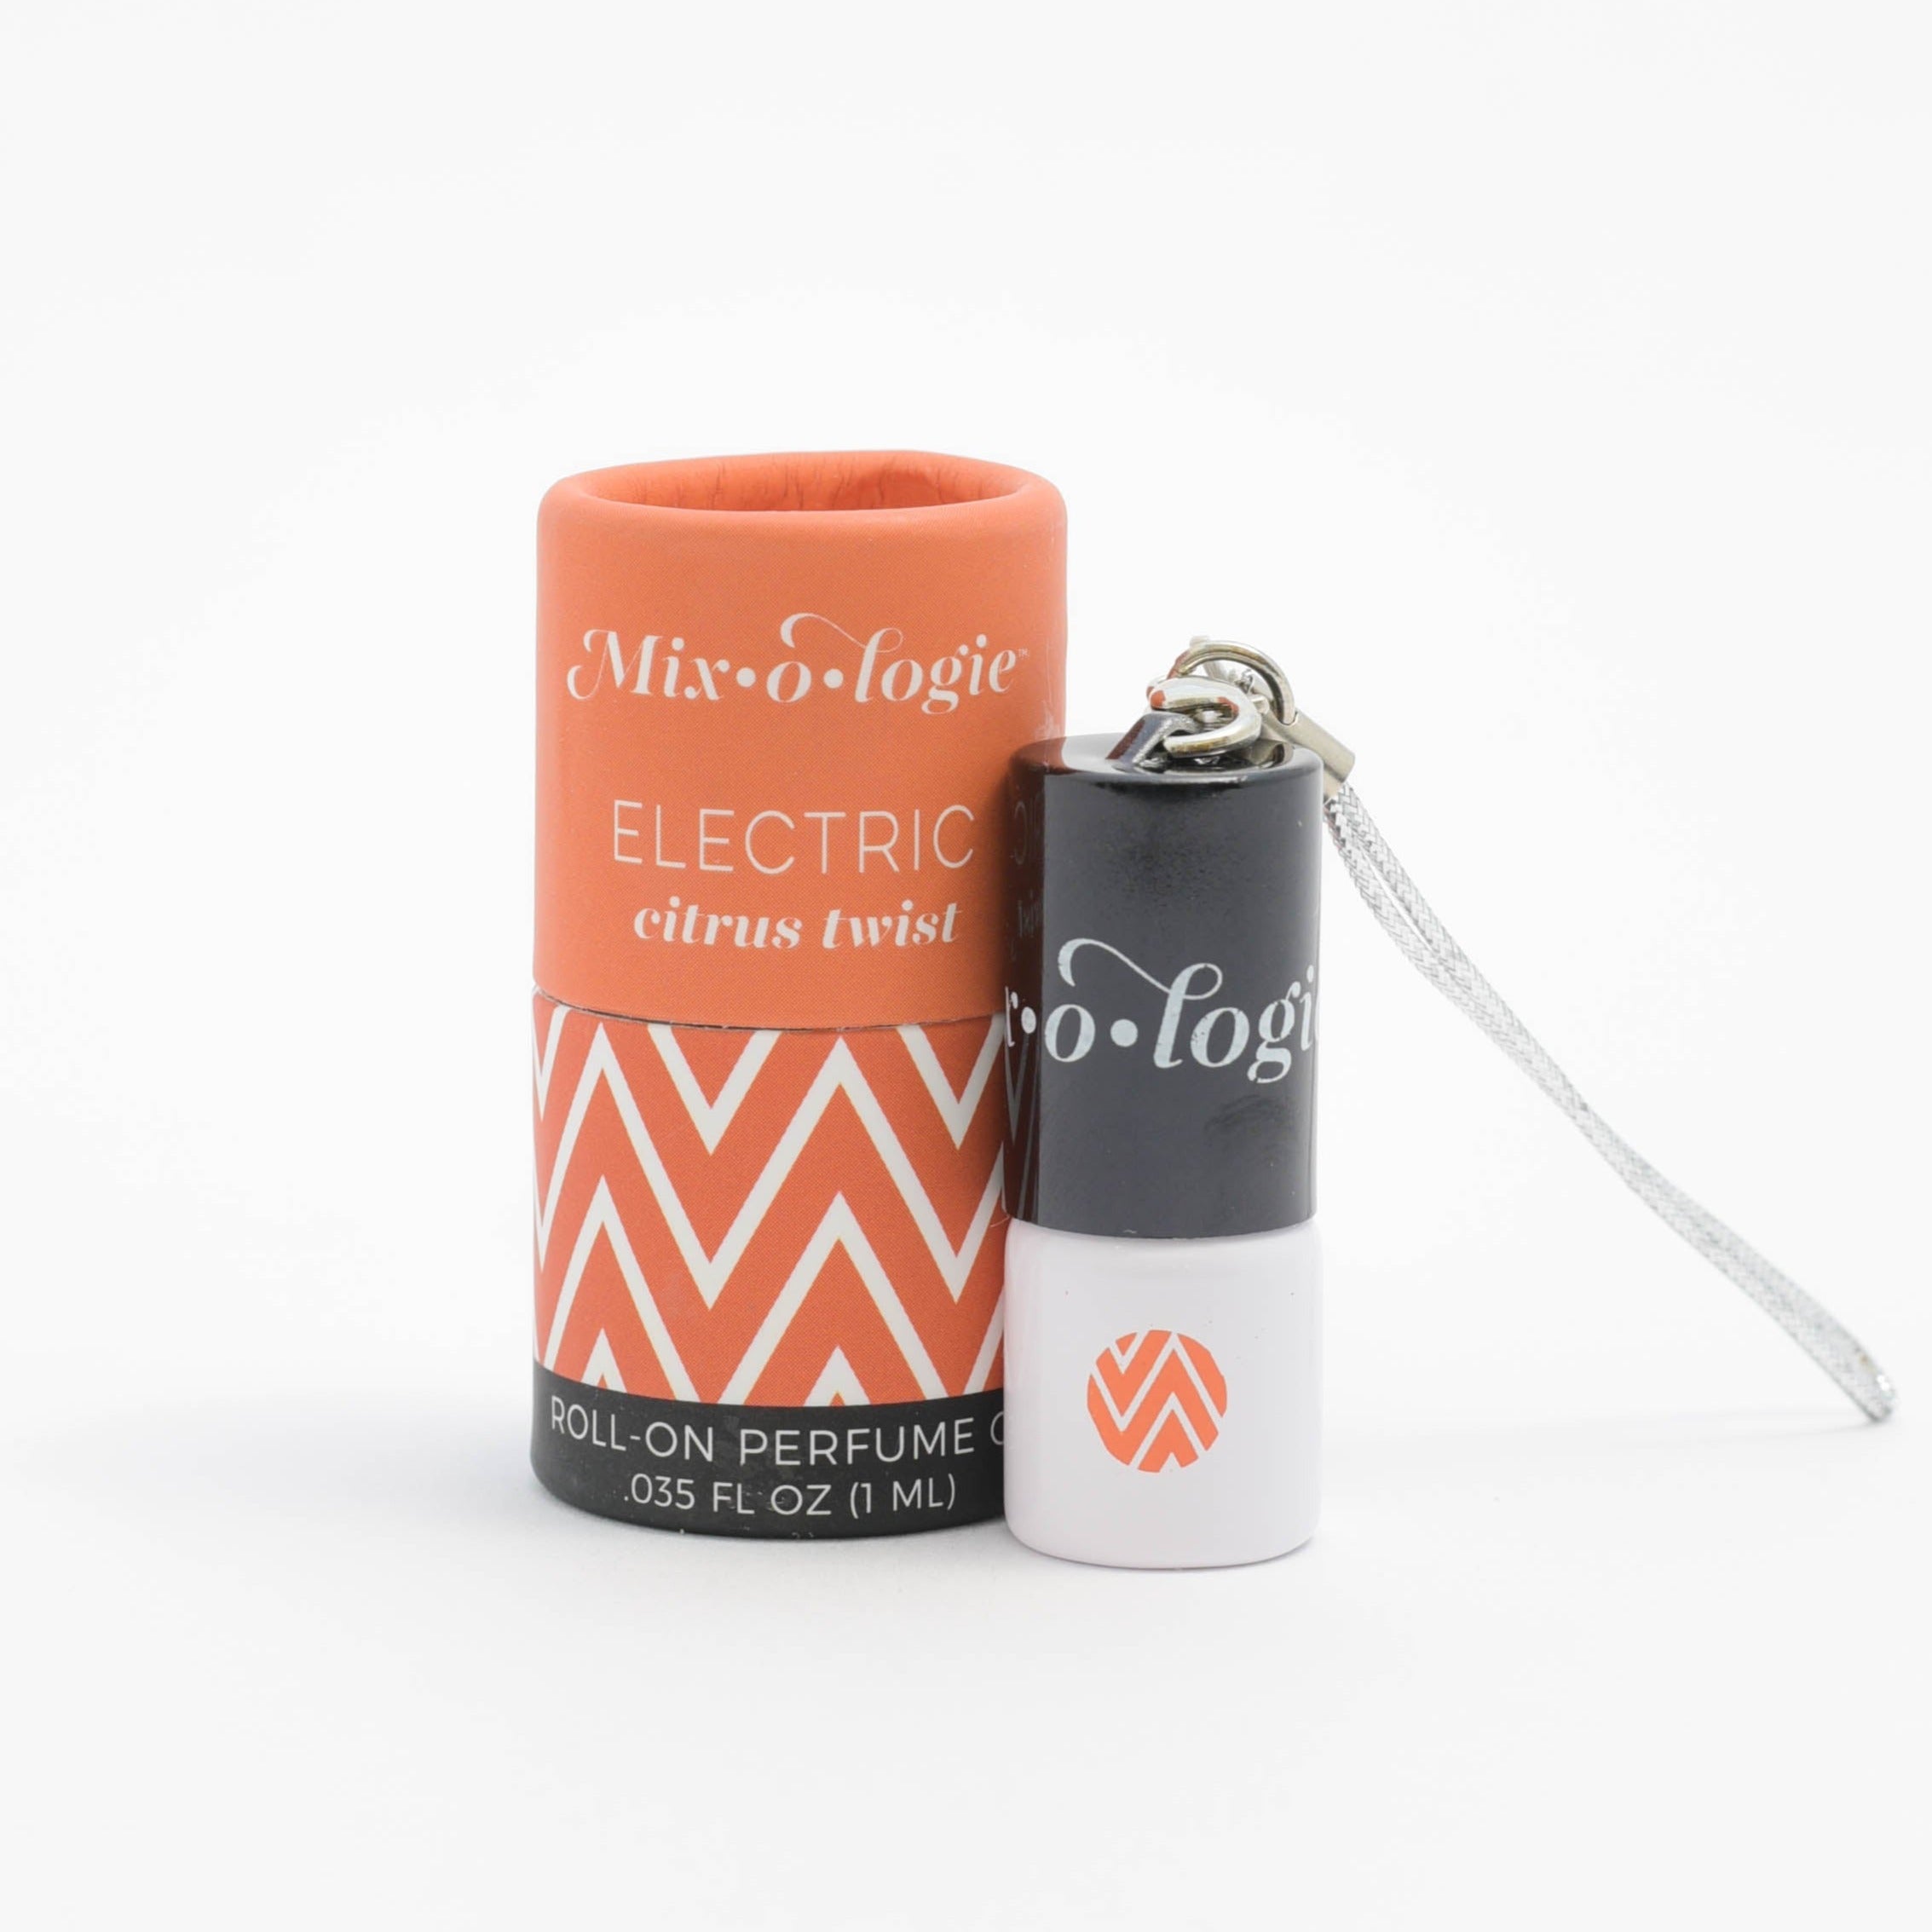 Mini keychain rollerball perfume scented with Mixologie's Electric (citrus twist) scent in 1 mL glass bottle with keychain lid. Displayed next to small cylinder packaging